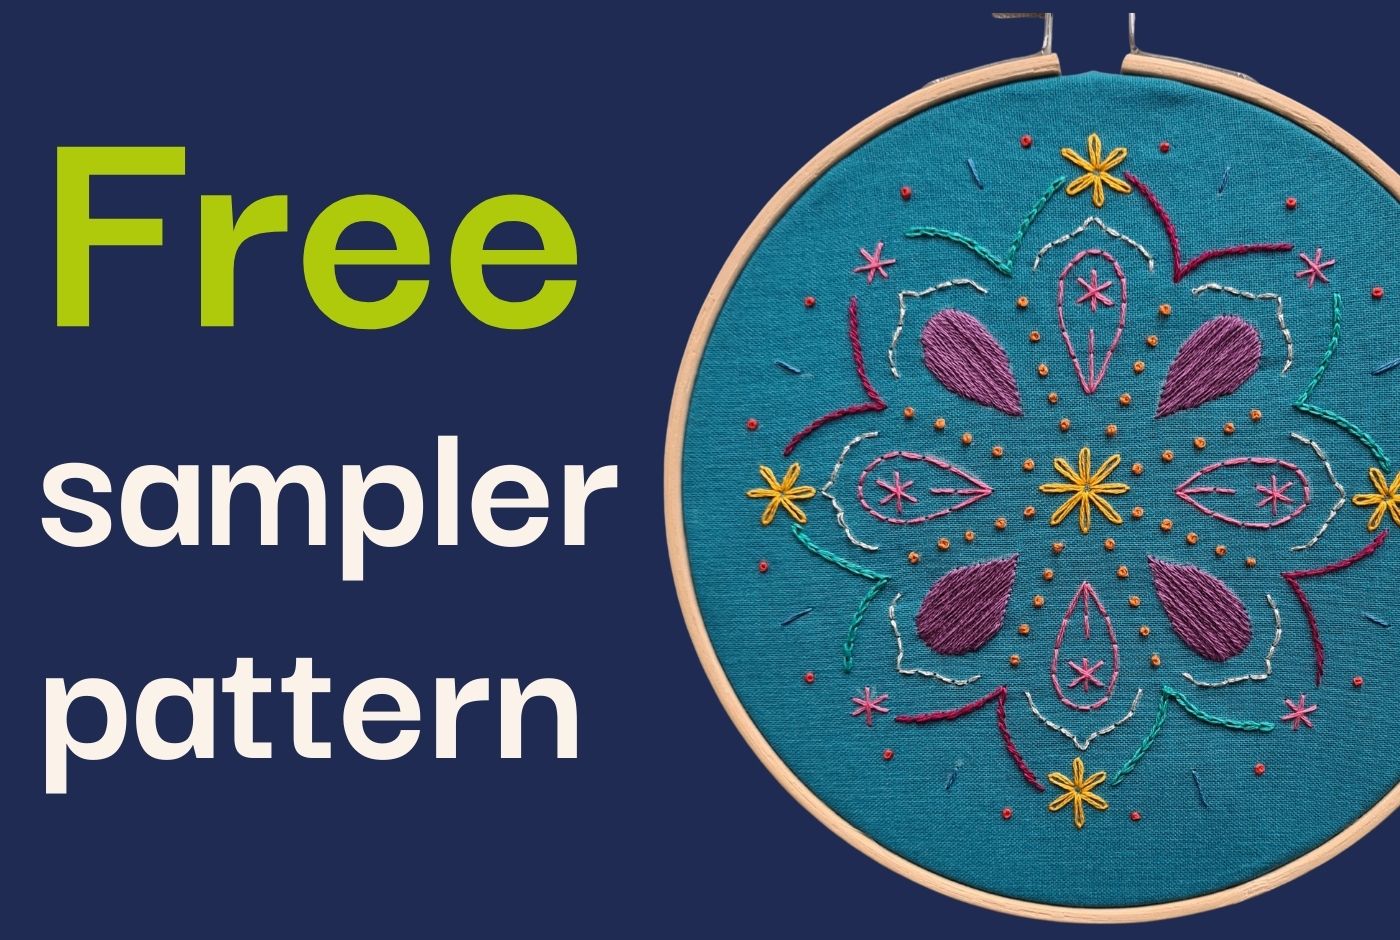 An embroidery hoop with a multicoloured sampler pattern using 8 stitches.